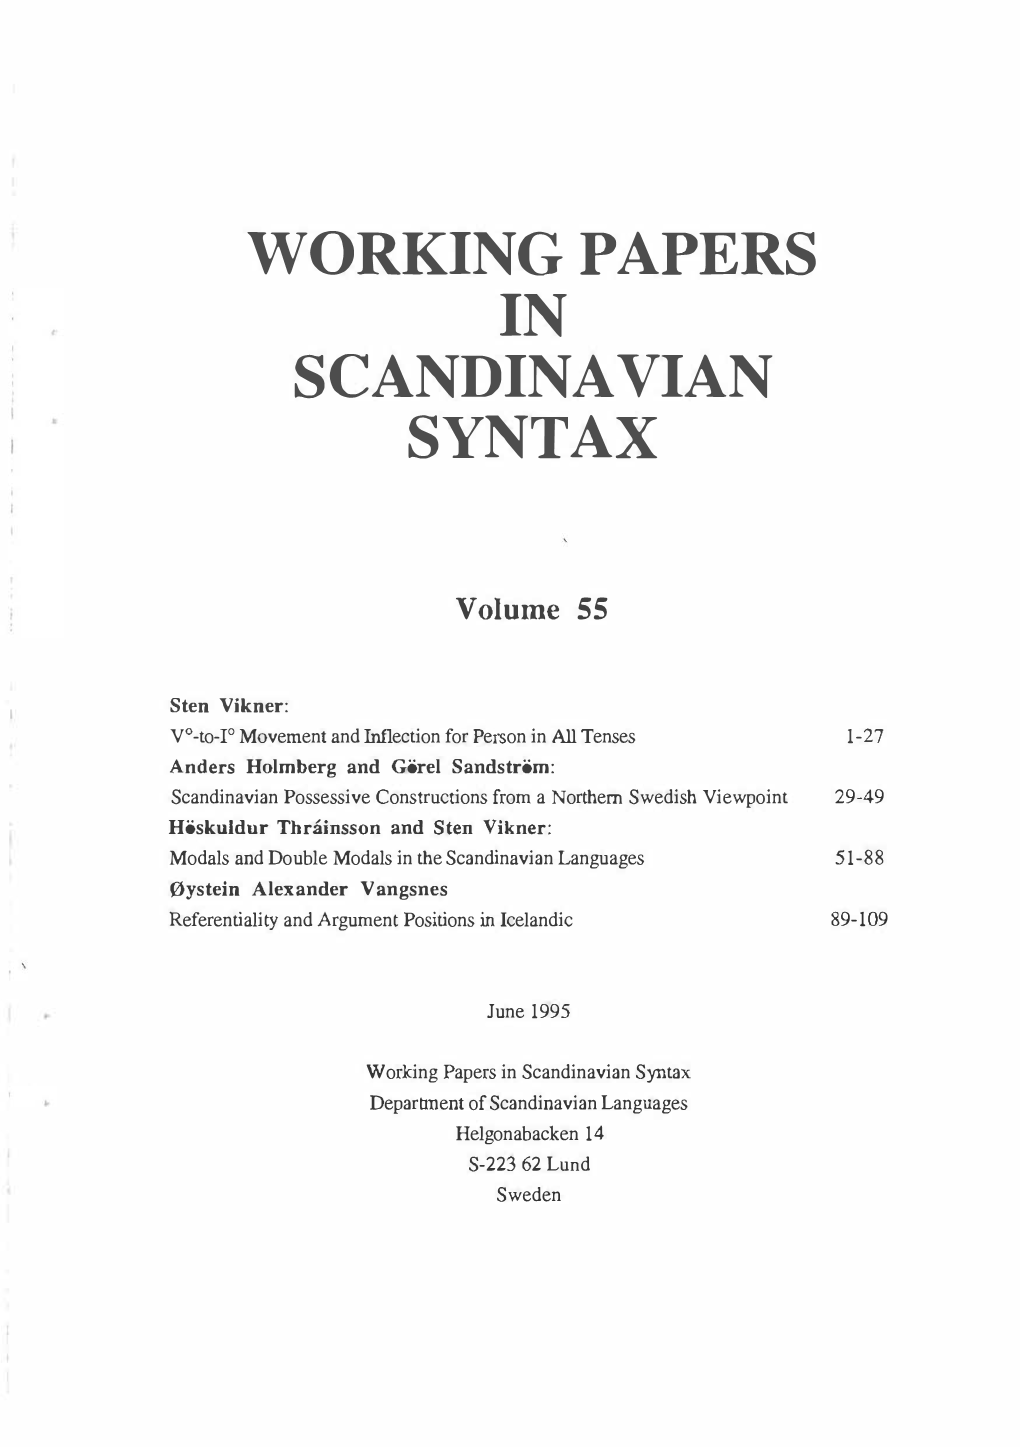 Working Papers in Scandina Vian Syntax